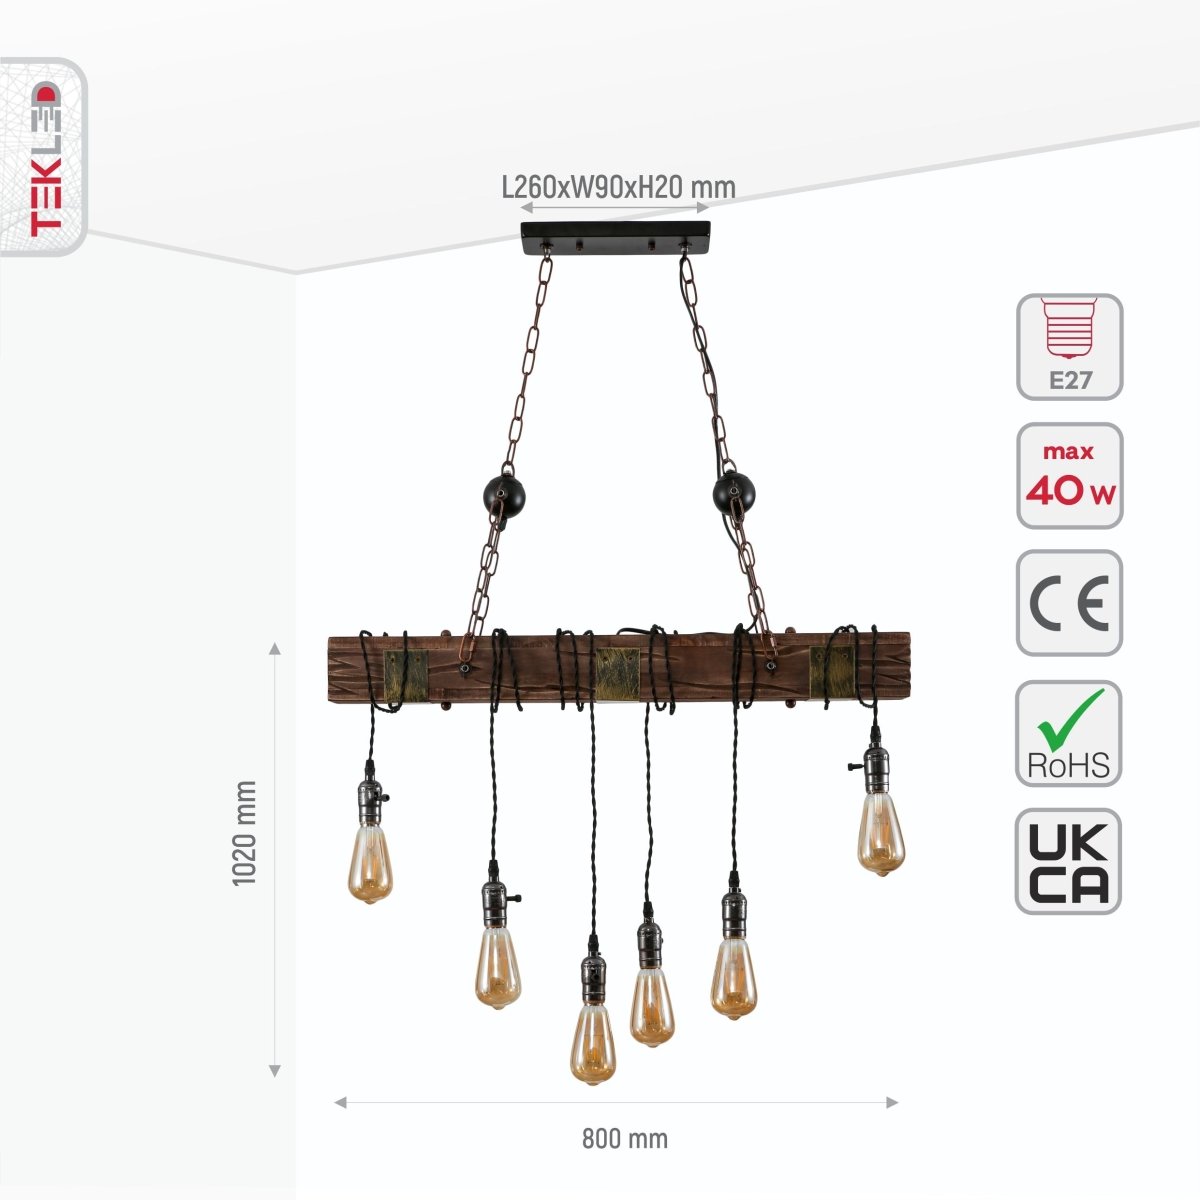 Size and specs of Timber Iron and Wood Island Chandelier 6xE27 | TEKLED 159-17856